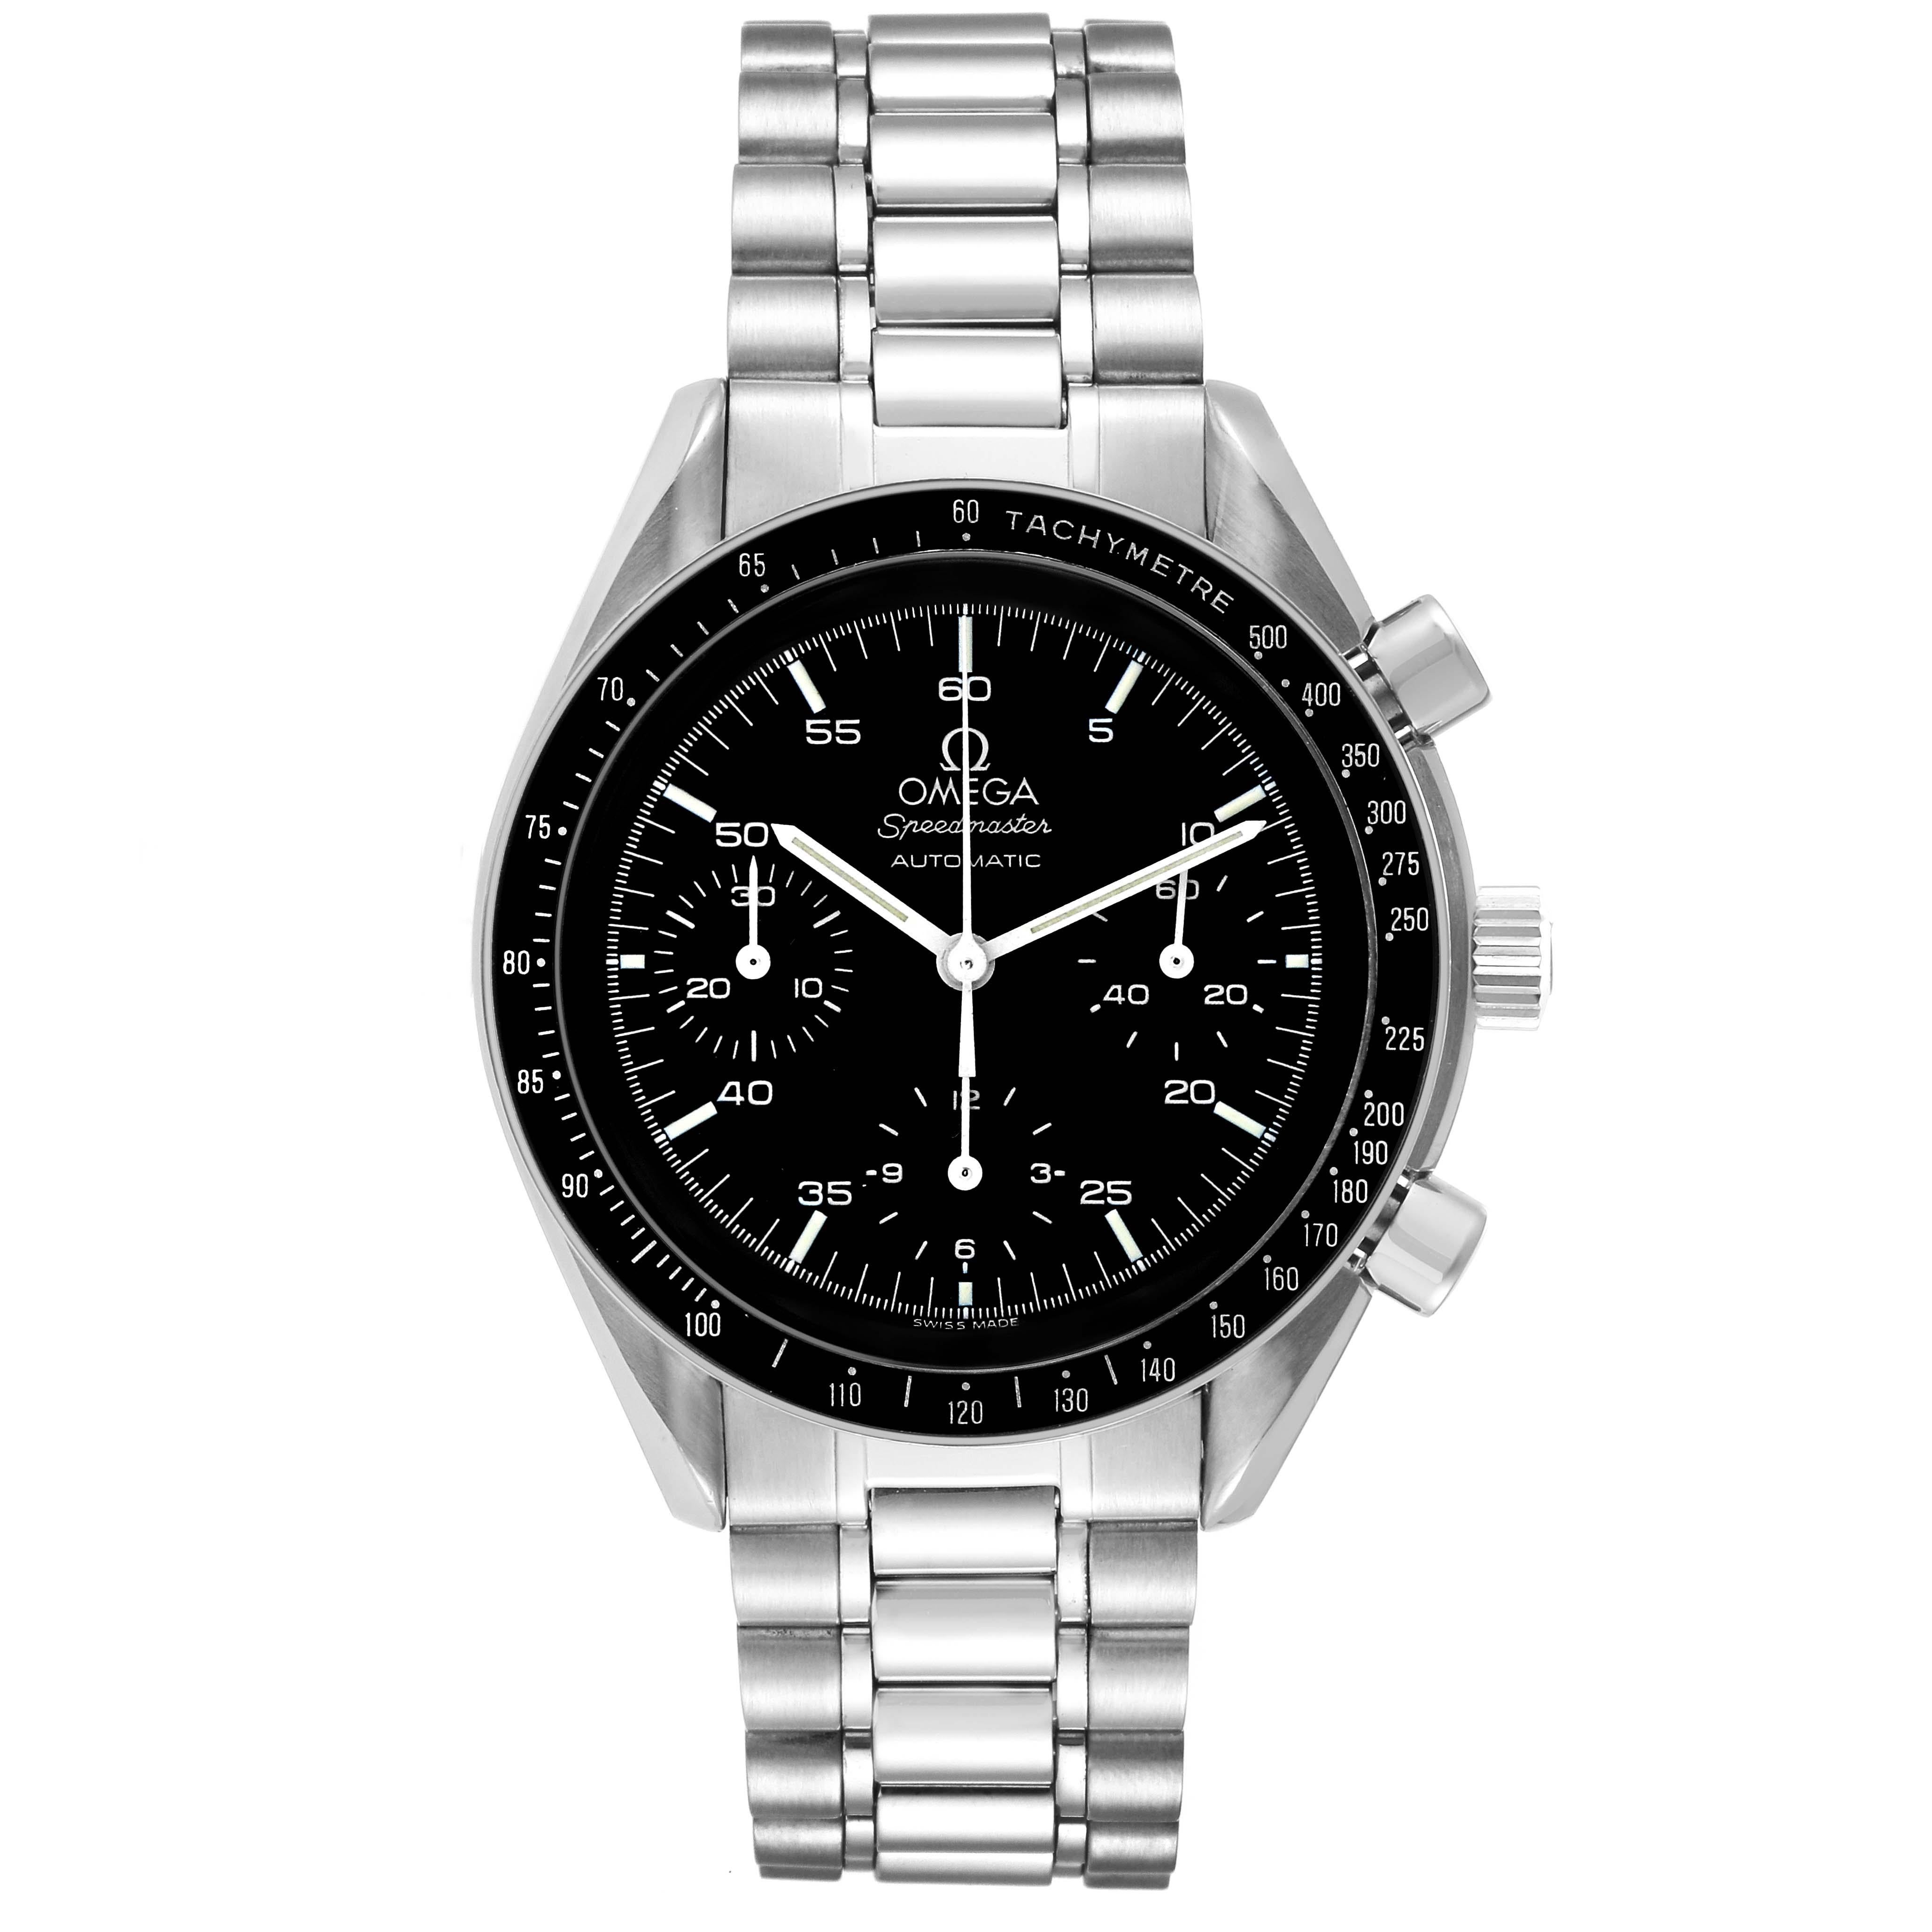 Omega Speedmaster Reduced Chronograph Hesalite Steel Mens Watch 3510.50.00 Card. Automatic self-winding chronograph movement. Stainless steel round case 39.0 mm in diameter. Stainless steel bezel with black insert and tachymeter function. Hesalite